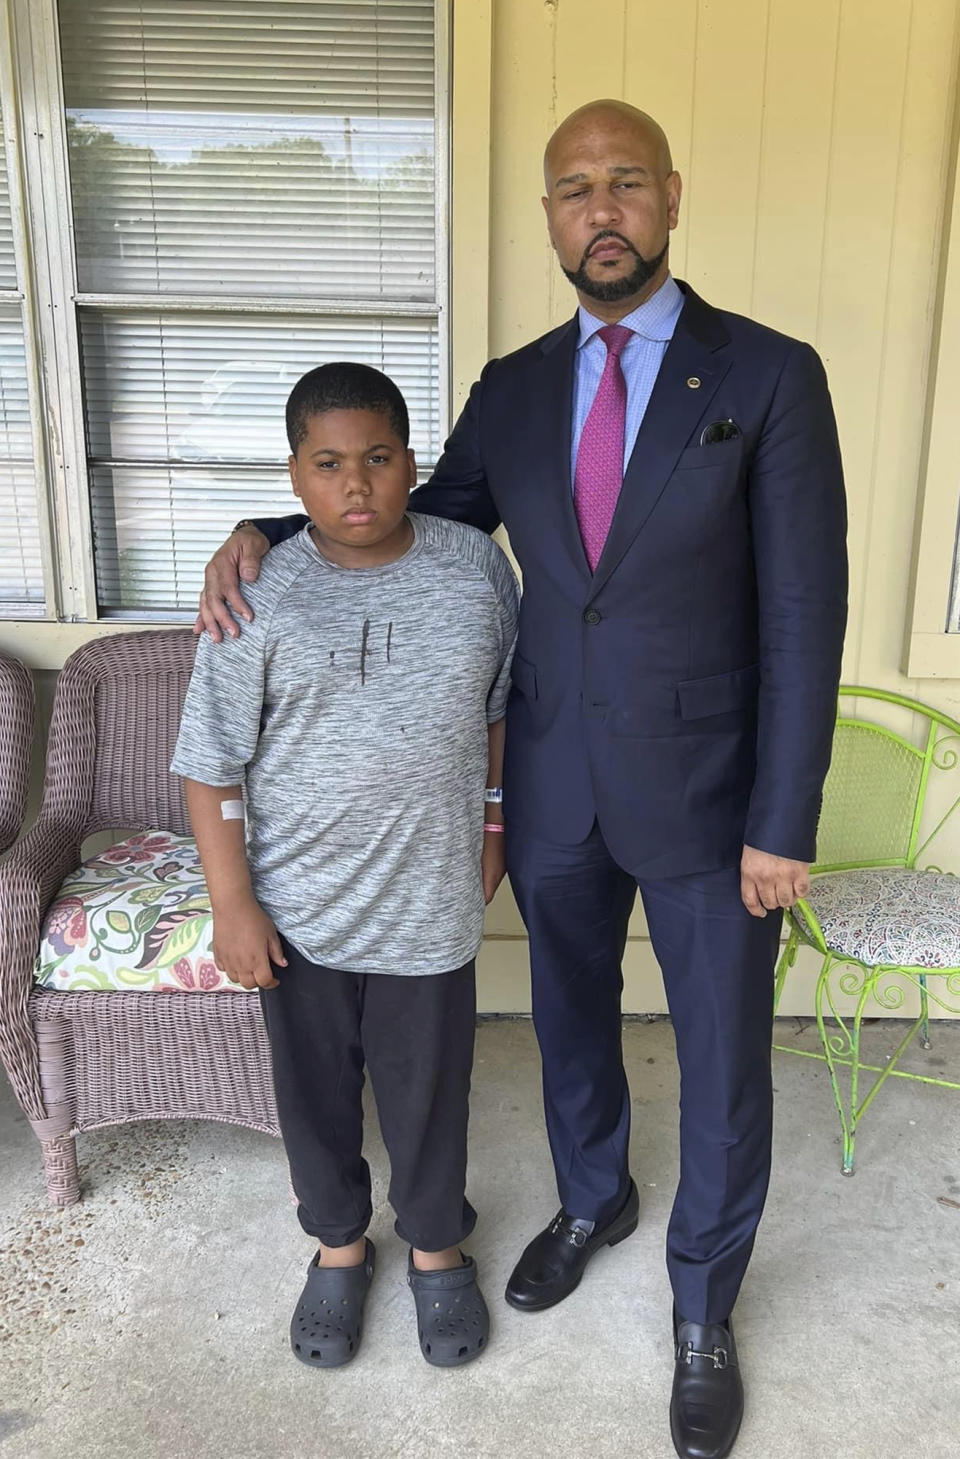 This undated photo provided by attorney Carlos Moore shows Moore, right, and his client, 11-year-old Aderrien Murry, at left. A Mississippi police officer who shot and wounded the unarmed 11-year-old boy in the child’s home has been suspended without pay, a city official said Tuesday, June 13, 2023. (Carlos Moore via AP)